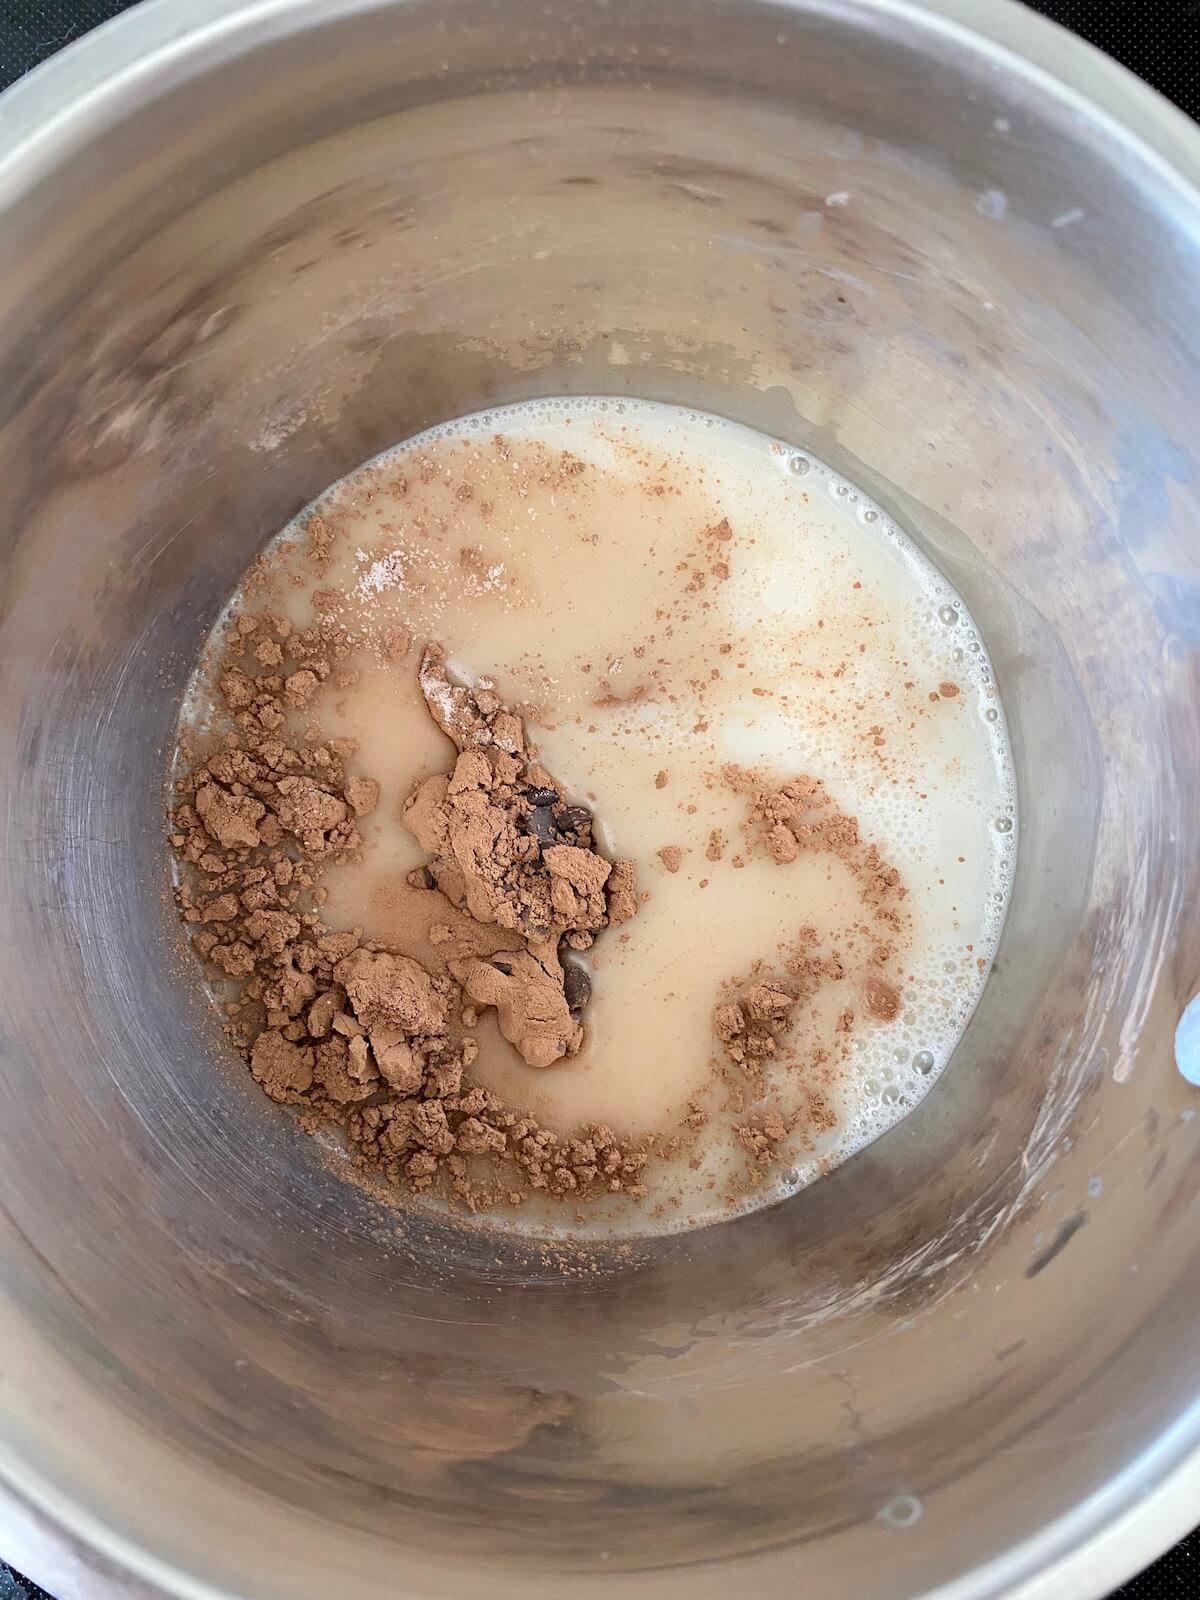 Oat milk, sugar, cocoa powder, and chocolate chips in a small, stainless steel saucepan before being whisked together.